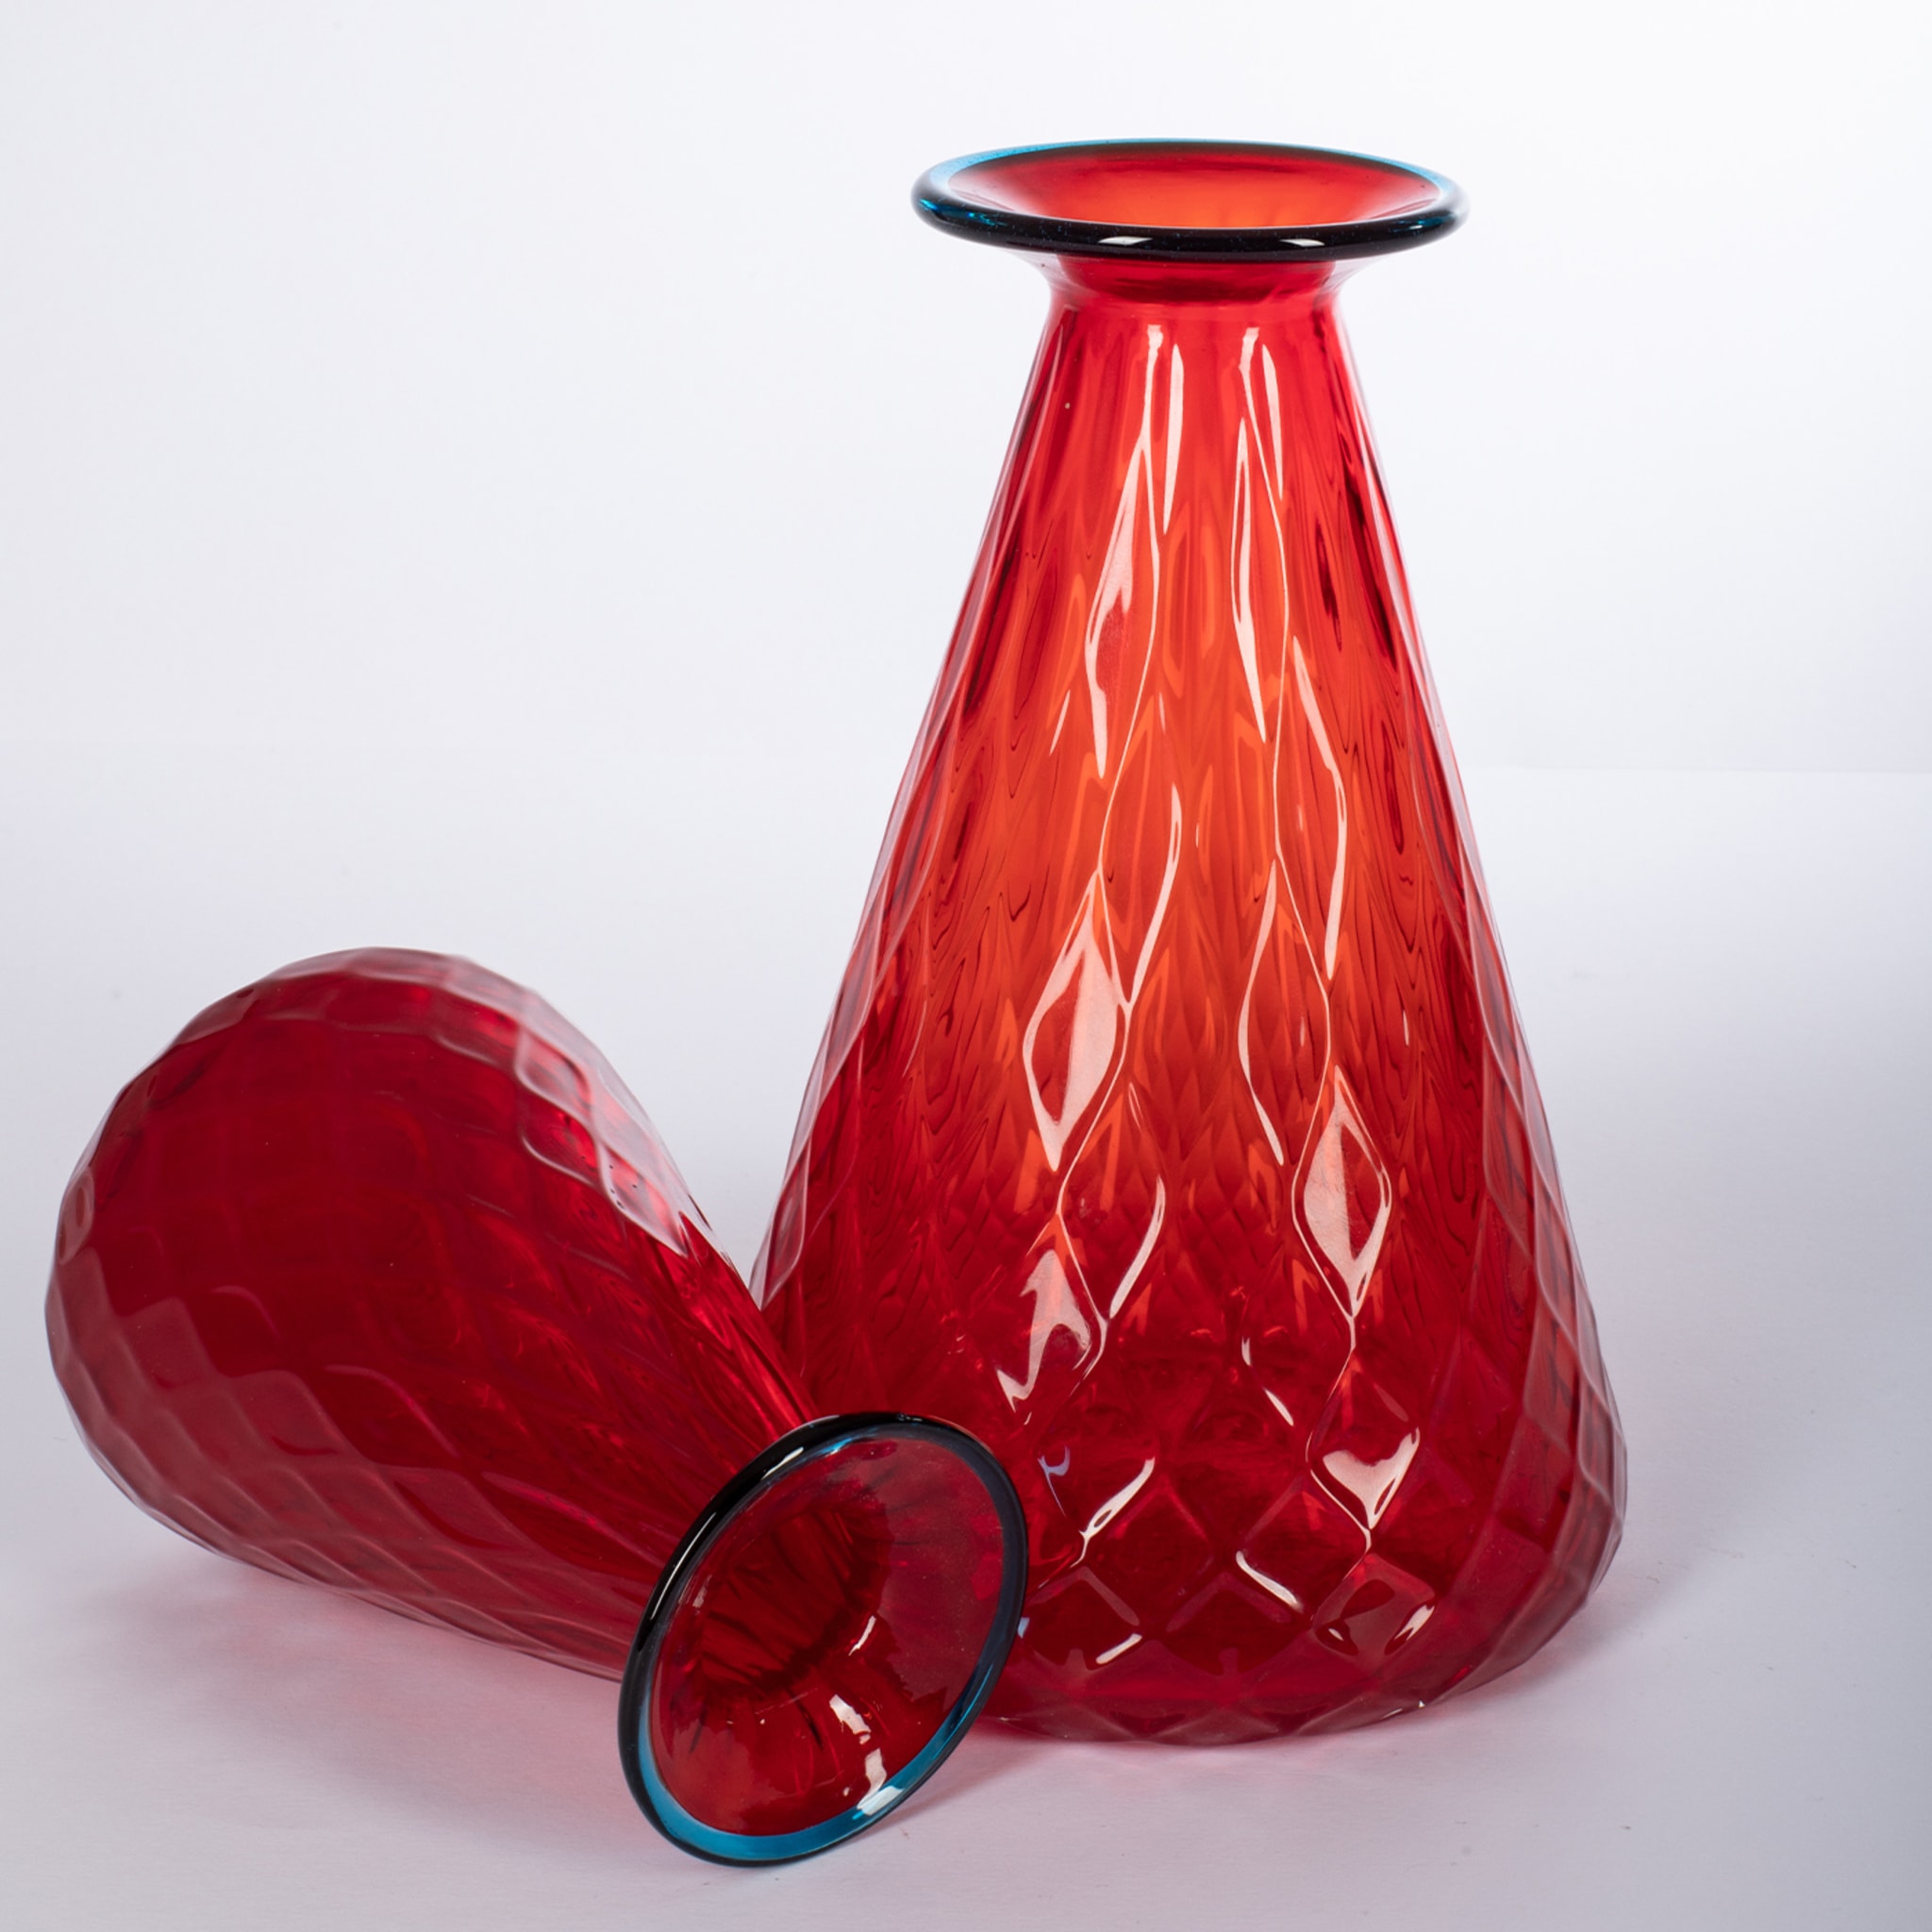 Balloton Set of 2 Conical Red Vases - Alternative view 1